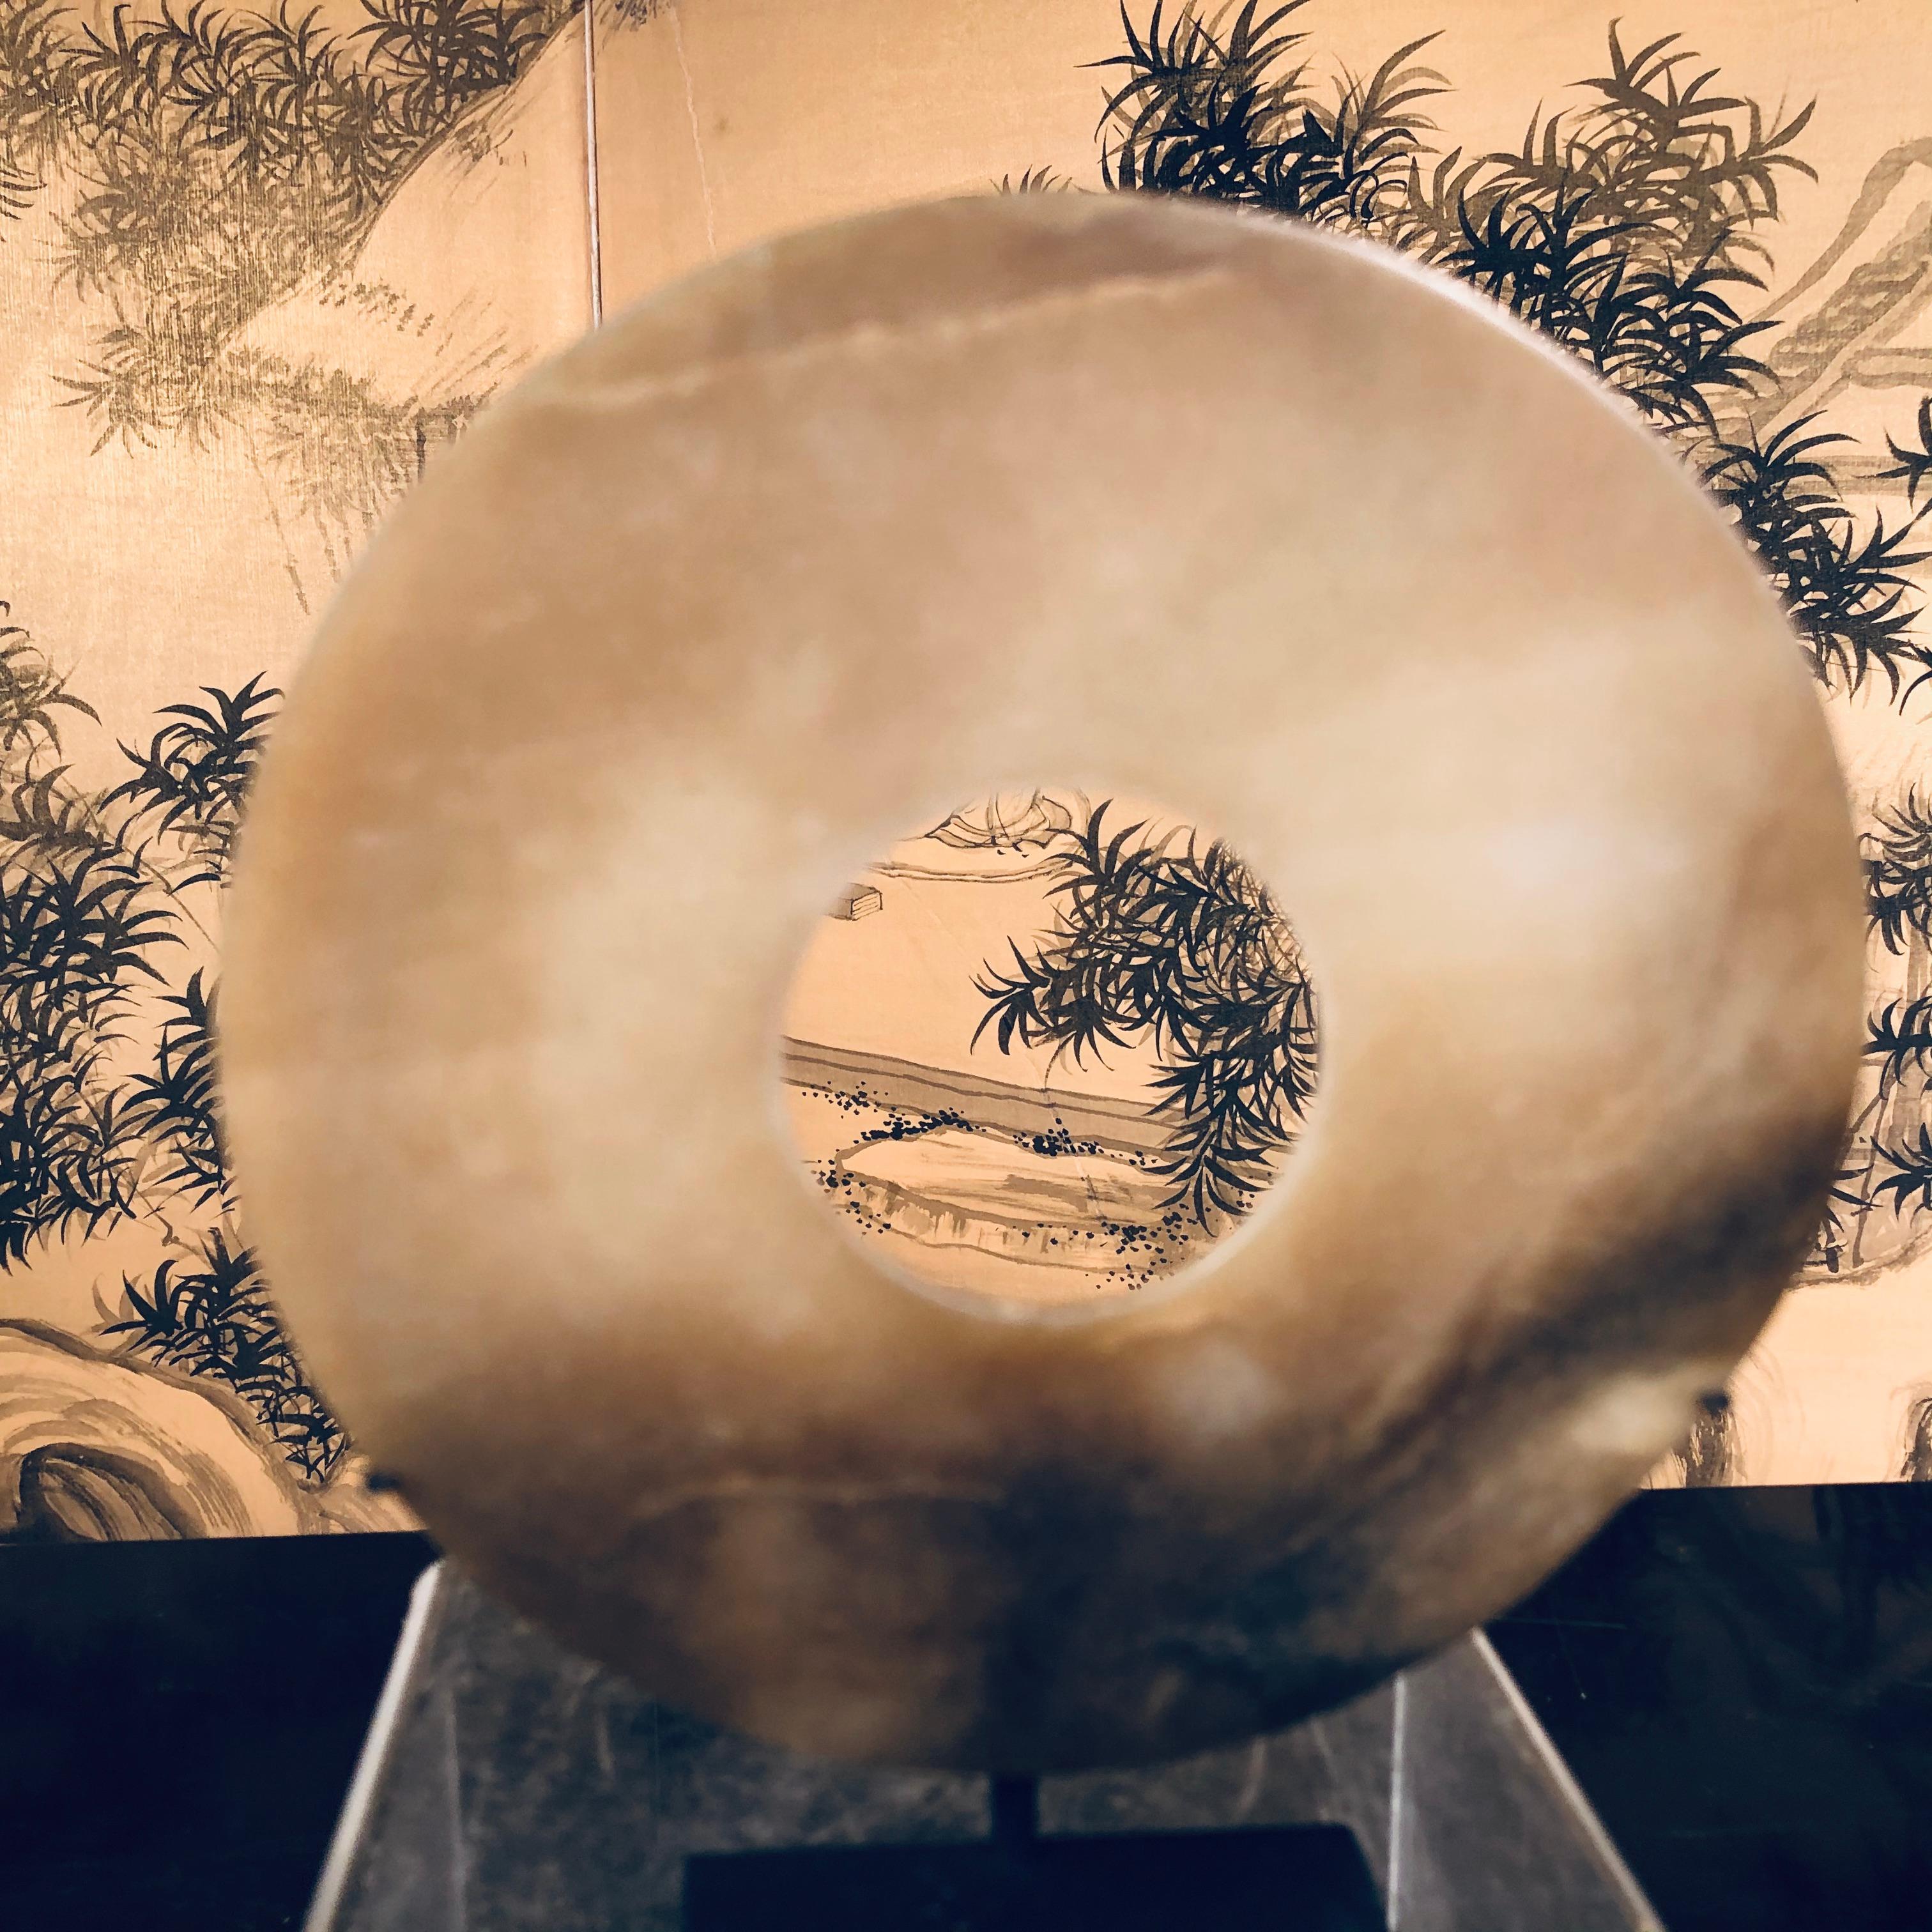 Hand-Carved Important Ancient Superb Chinese Round Jade Bi Disc, 2000 BCE